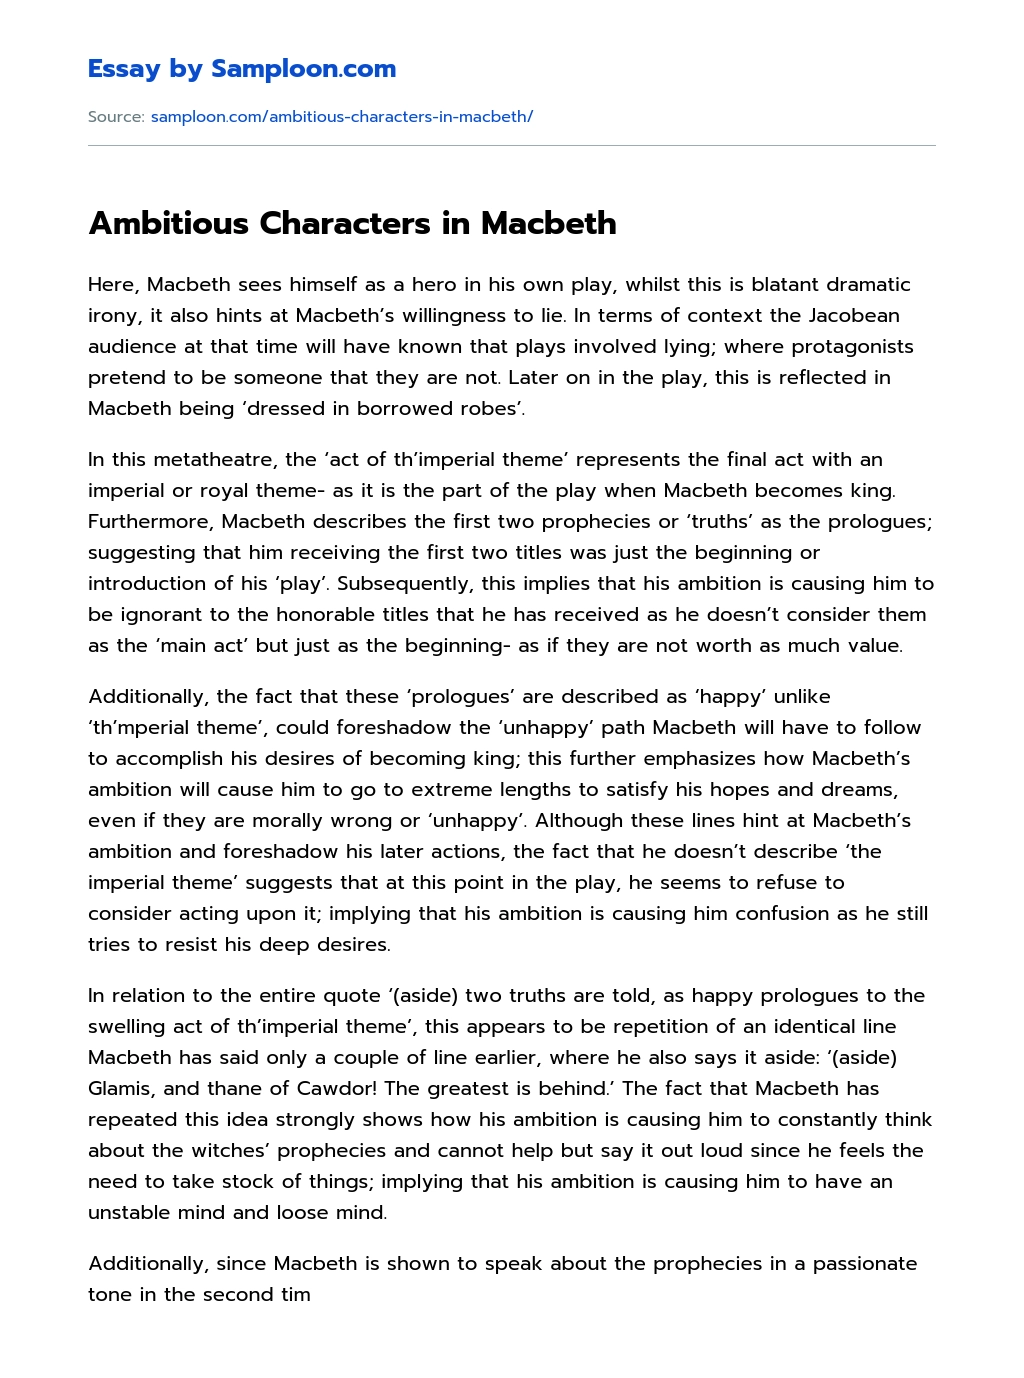 Ambitious Characters in Macbeth Analytical Essay essay